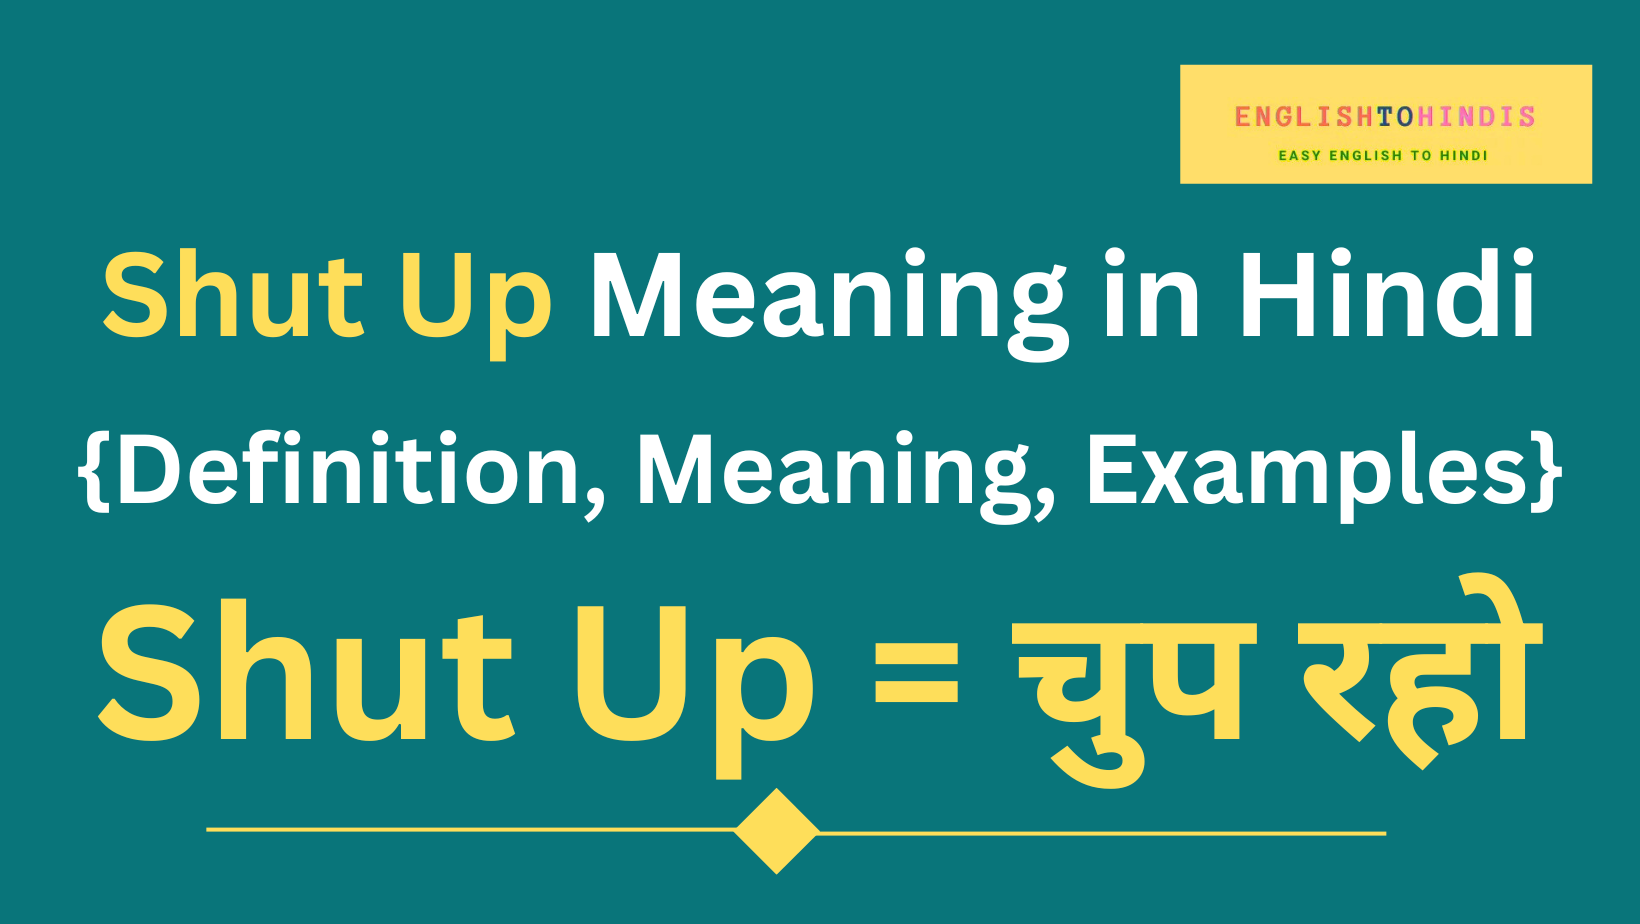 Shut Up Meaning in Hindi